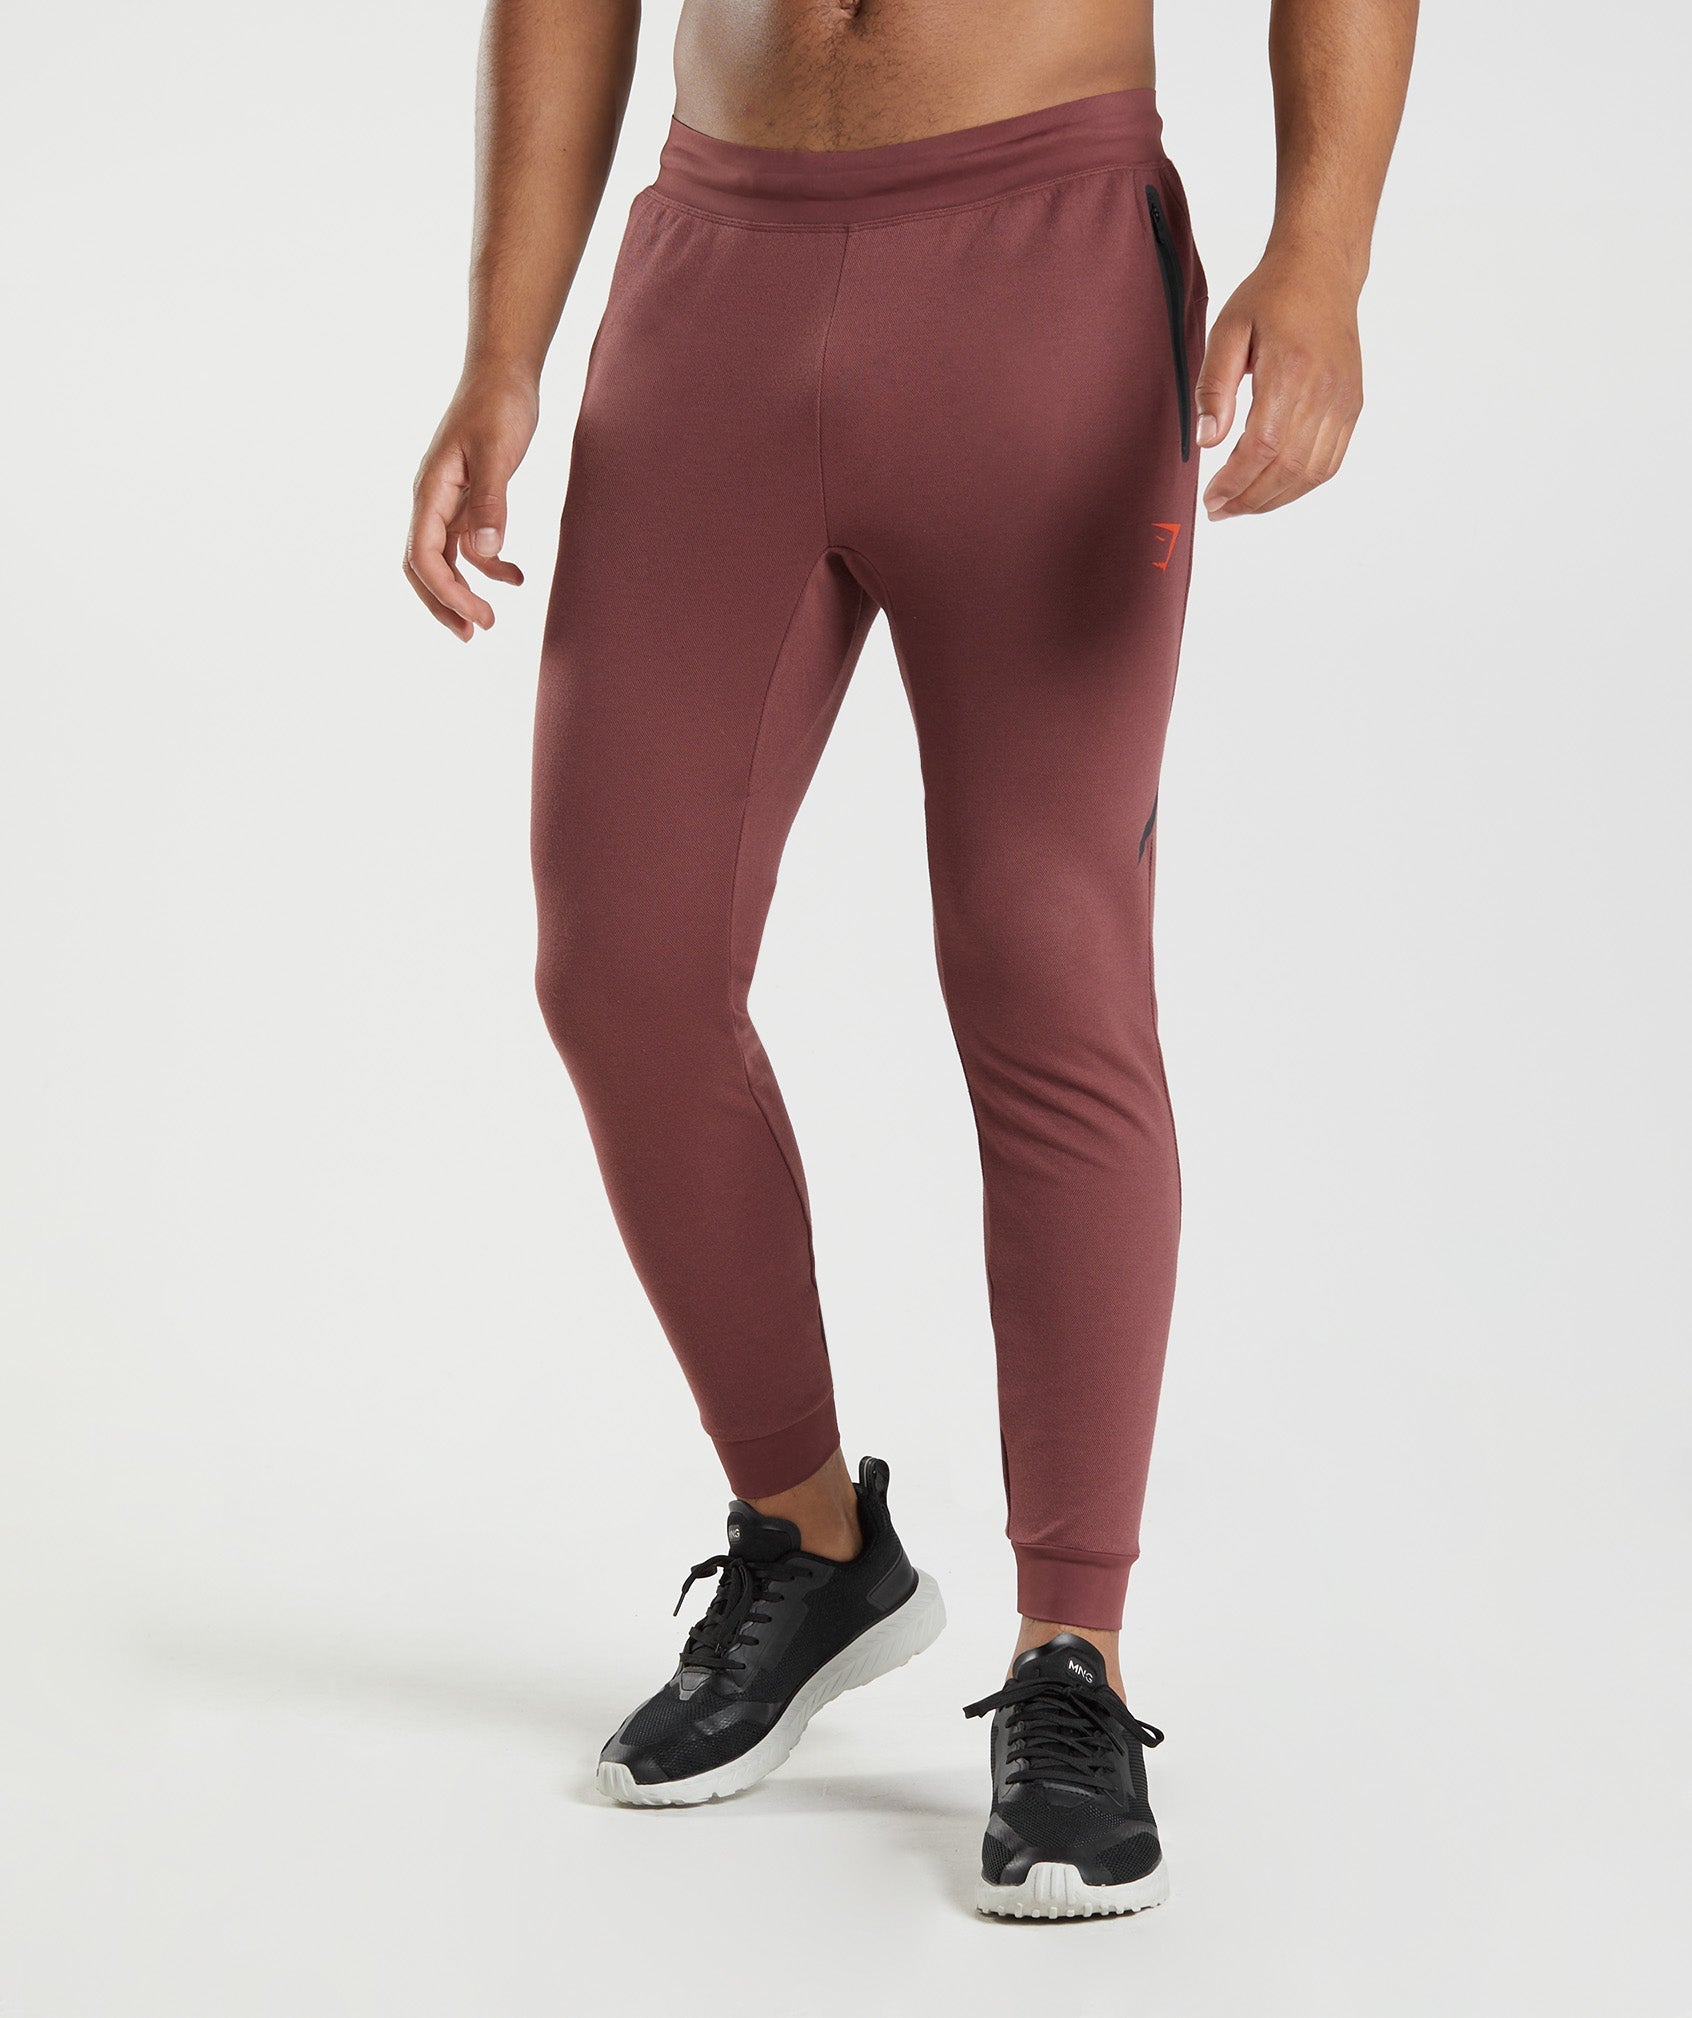 Apex Technical Joggers in Cherry Brown - view 1